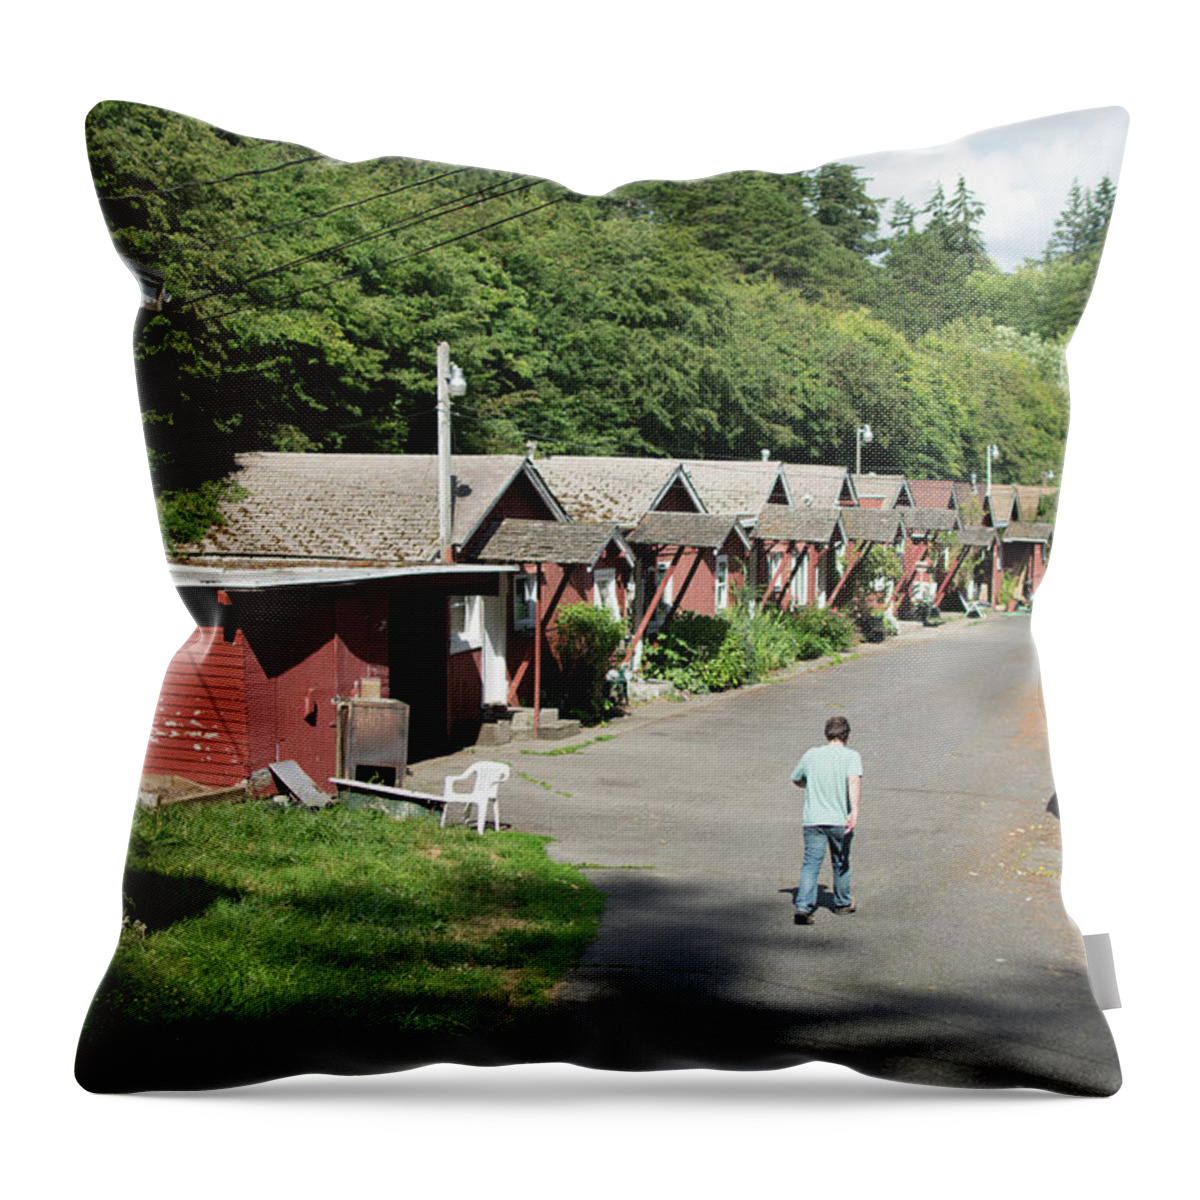 Walking Home Throw Pillow featuring the photograph Walking Home by Tom Cochran